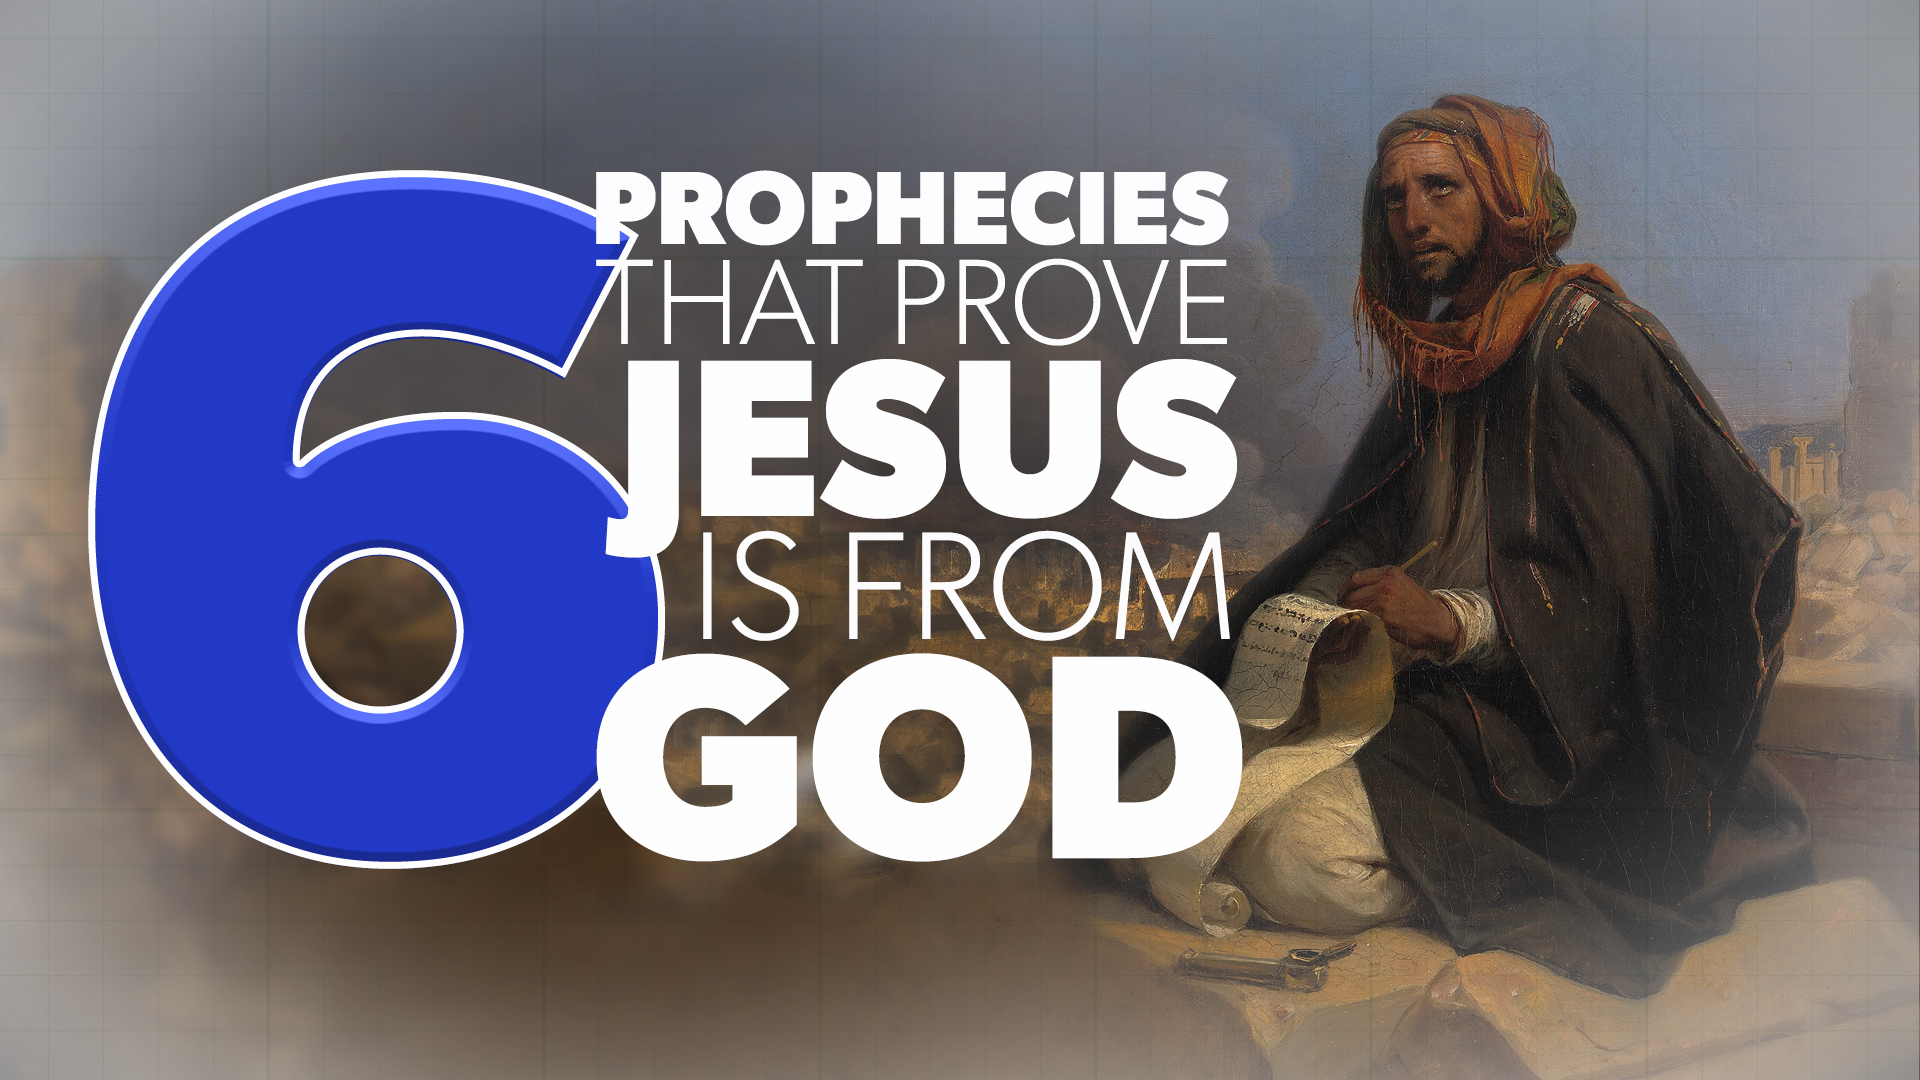 Six Prophecies that prove Jesus is from God